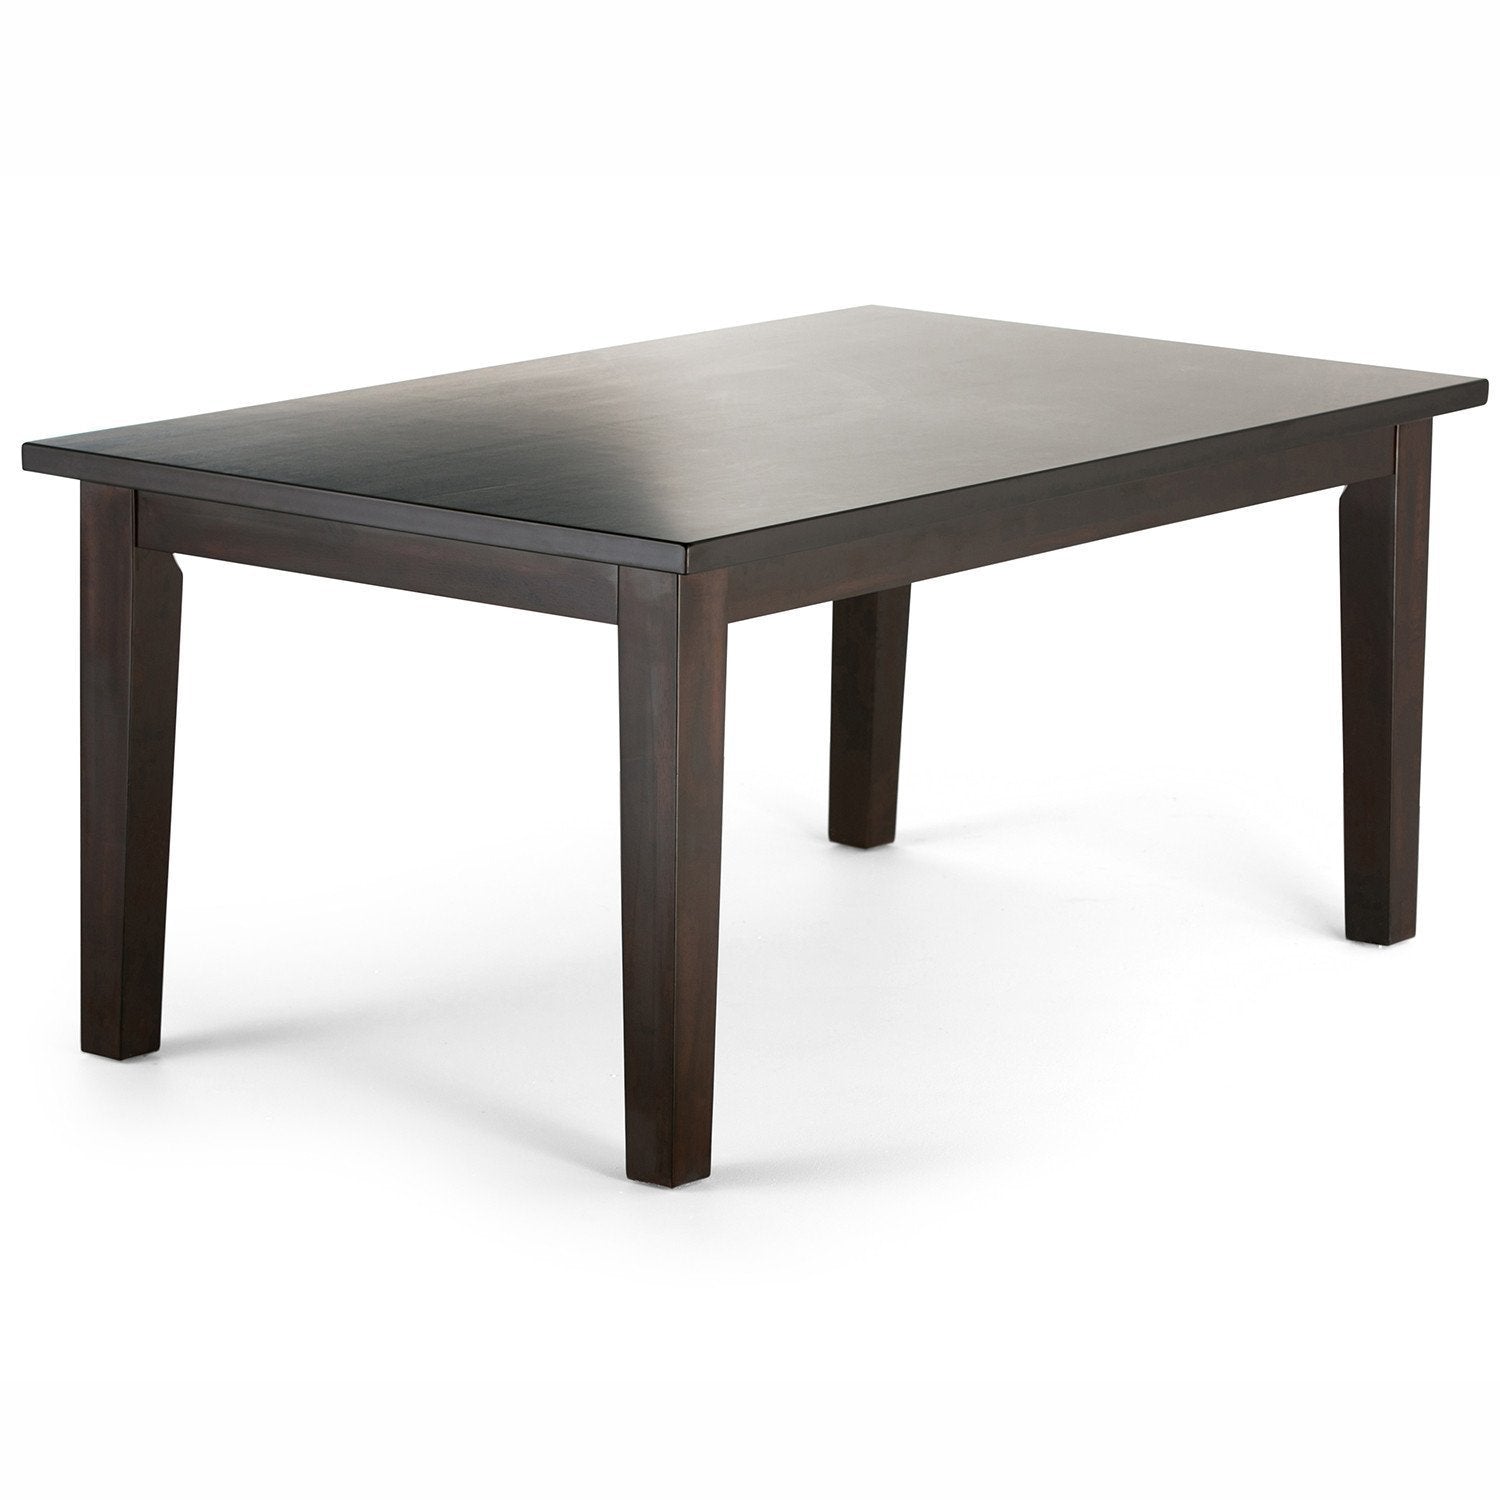 Java Brown Solid Wood - Rubber | Eastwood 66 x 40 inch Rectangle Dining Table